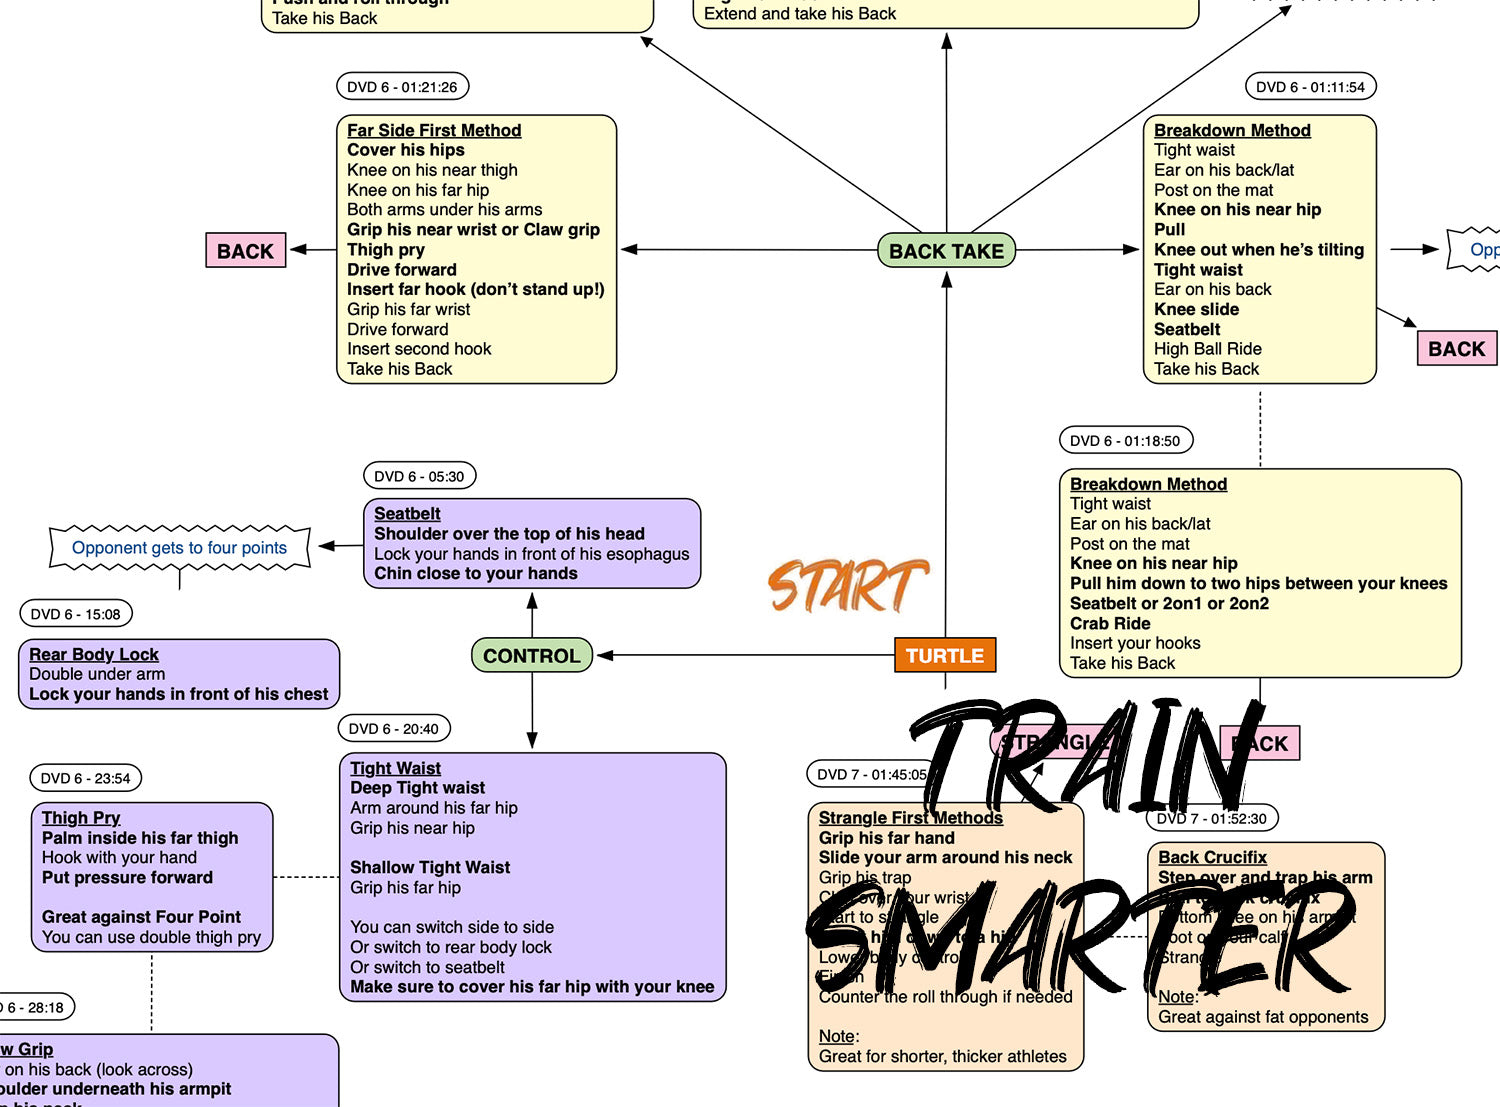 BJJFlowCharts-Flow Chart of Danaher's The Fastest Way to Increase your Submission Percentage NoGi Jiu-Jitsu System